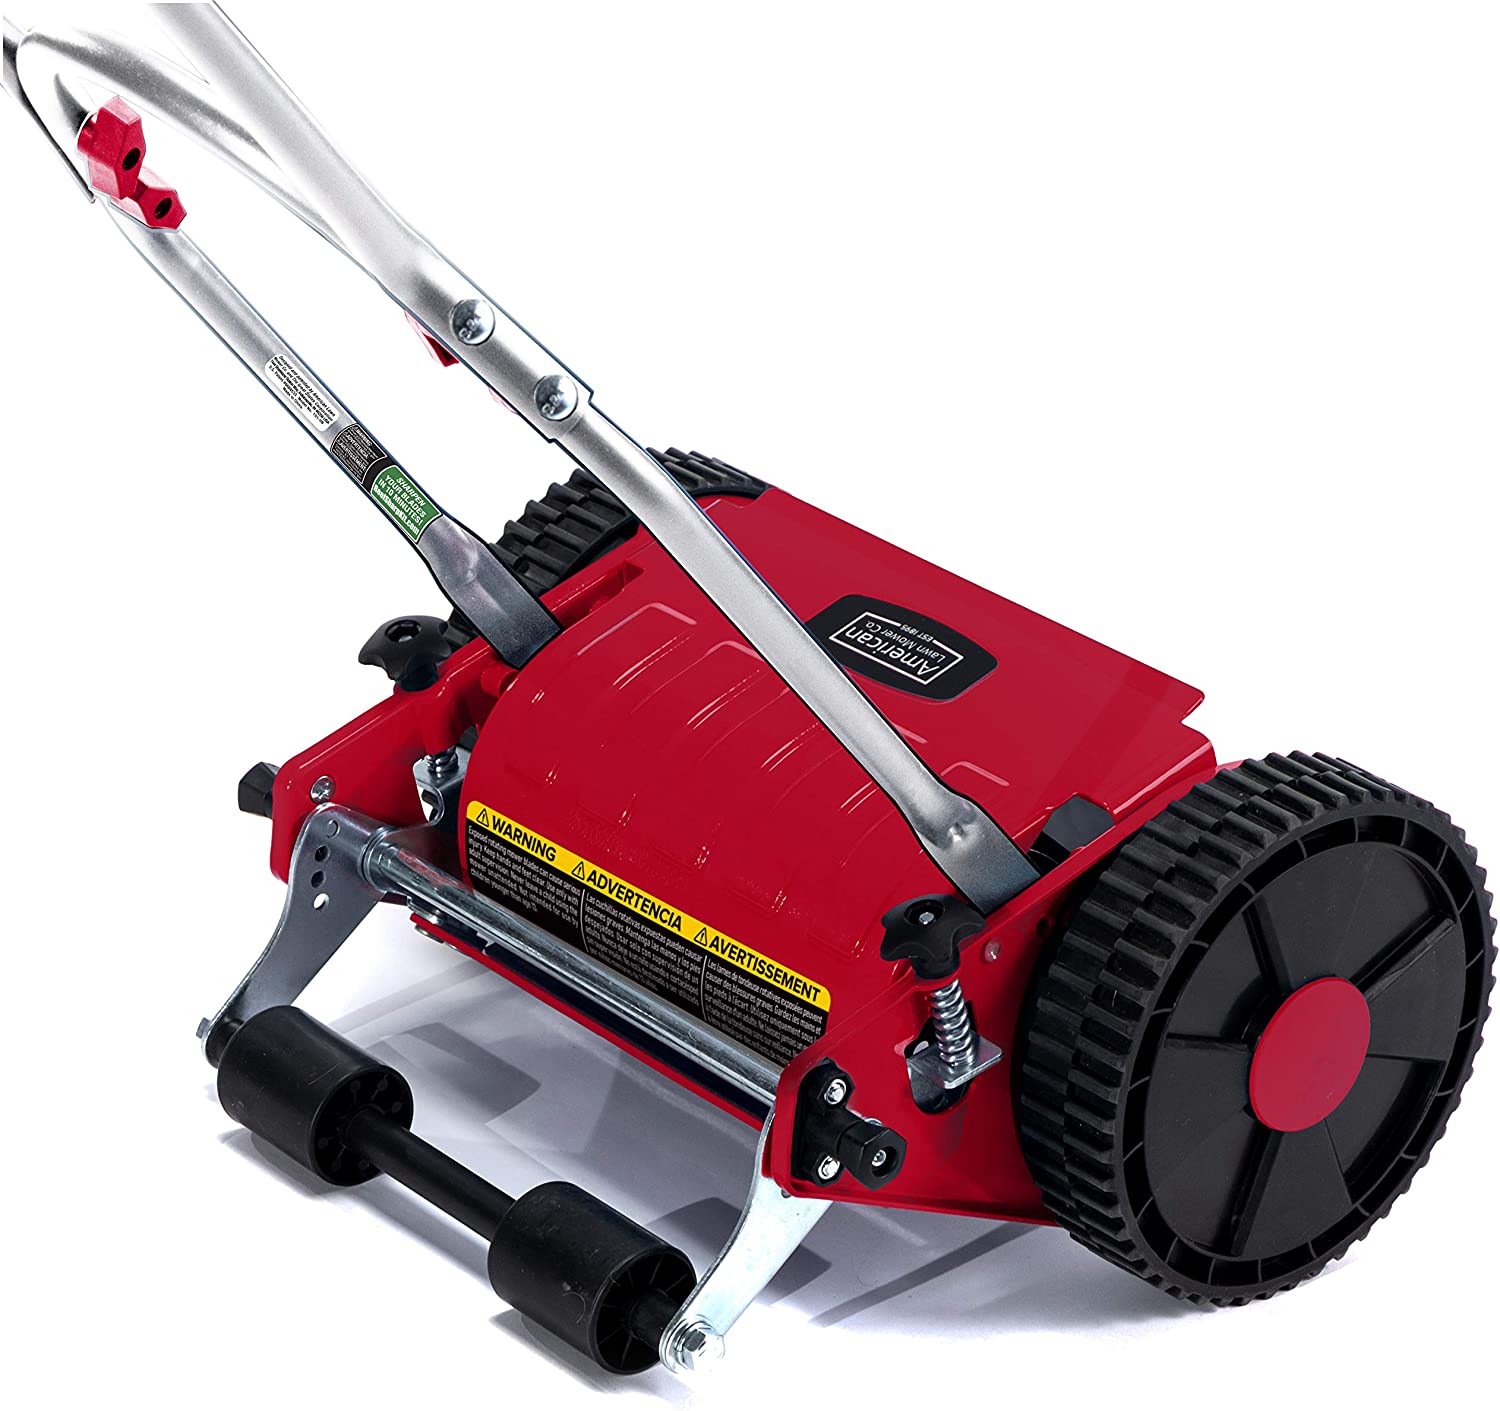 American Lawn Mower Company 101-08 Youth Grass Shark 8-Inch 5-Blade Manual Push Reel Lawn Mower， Red